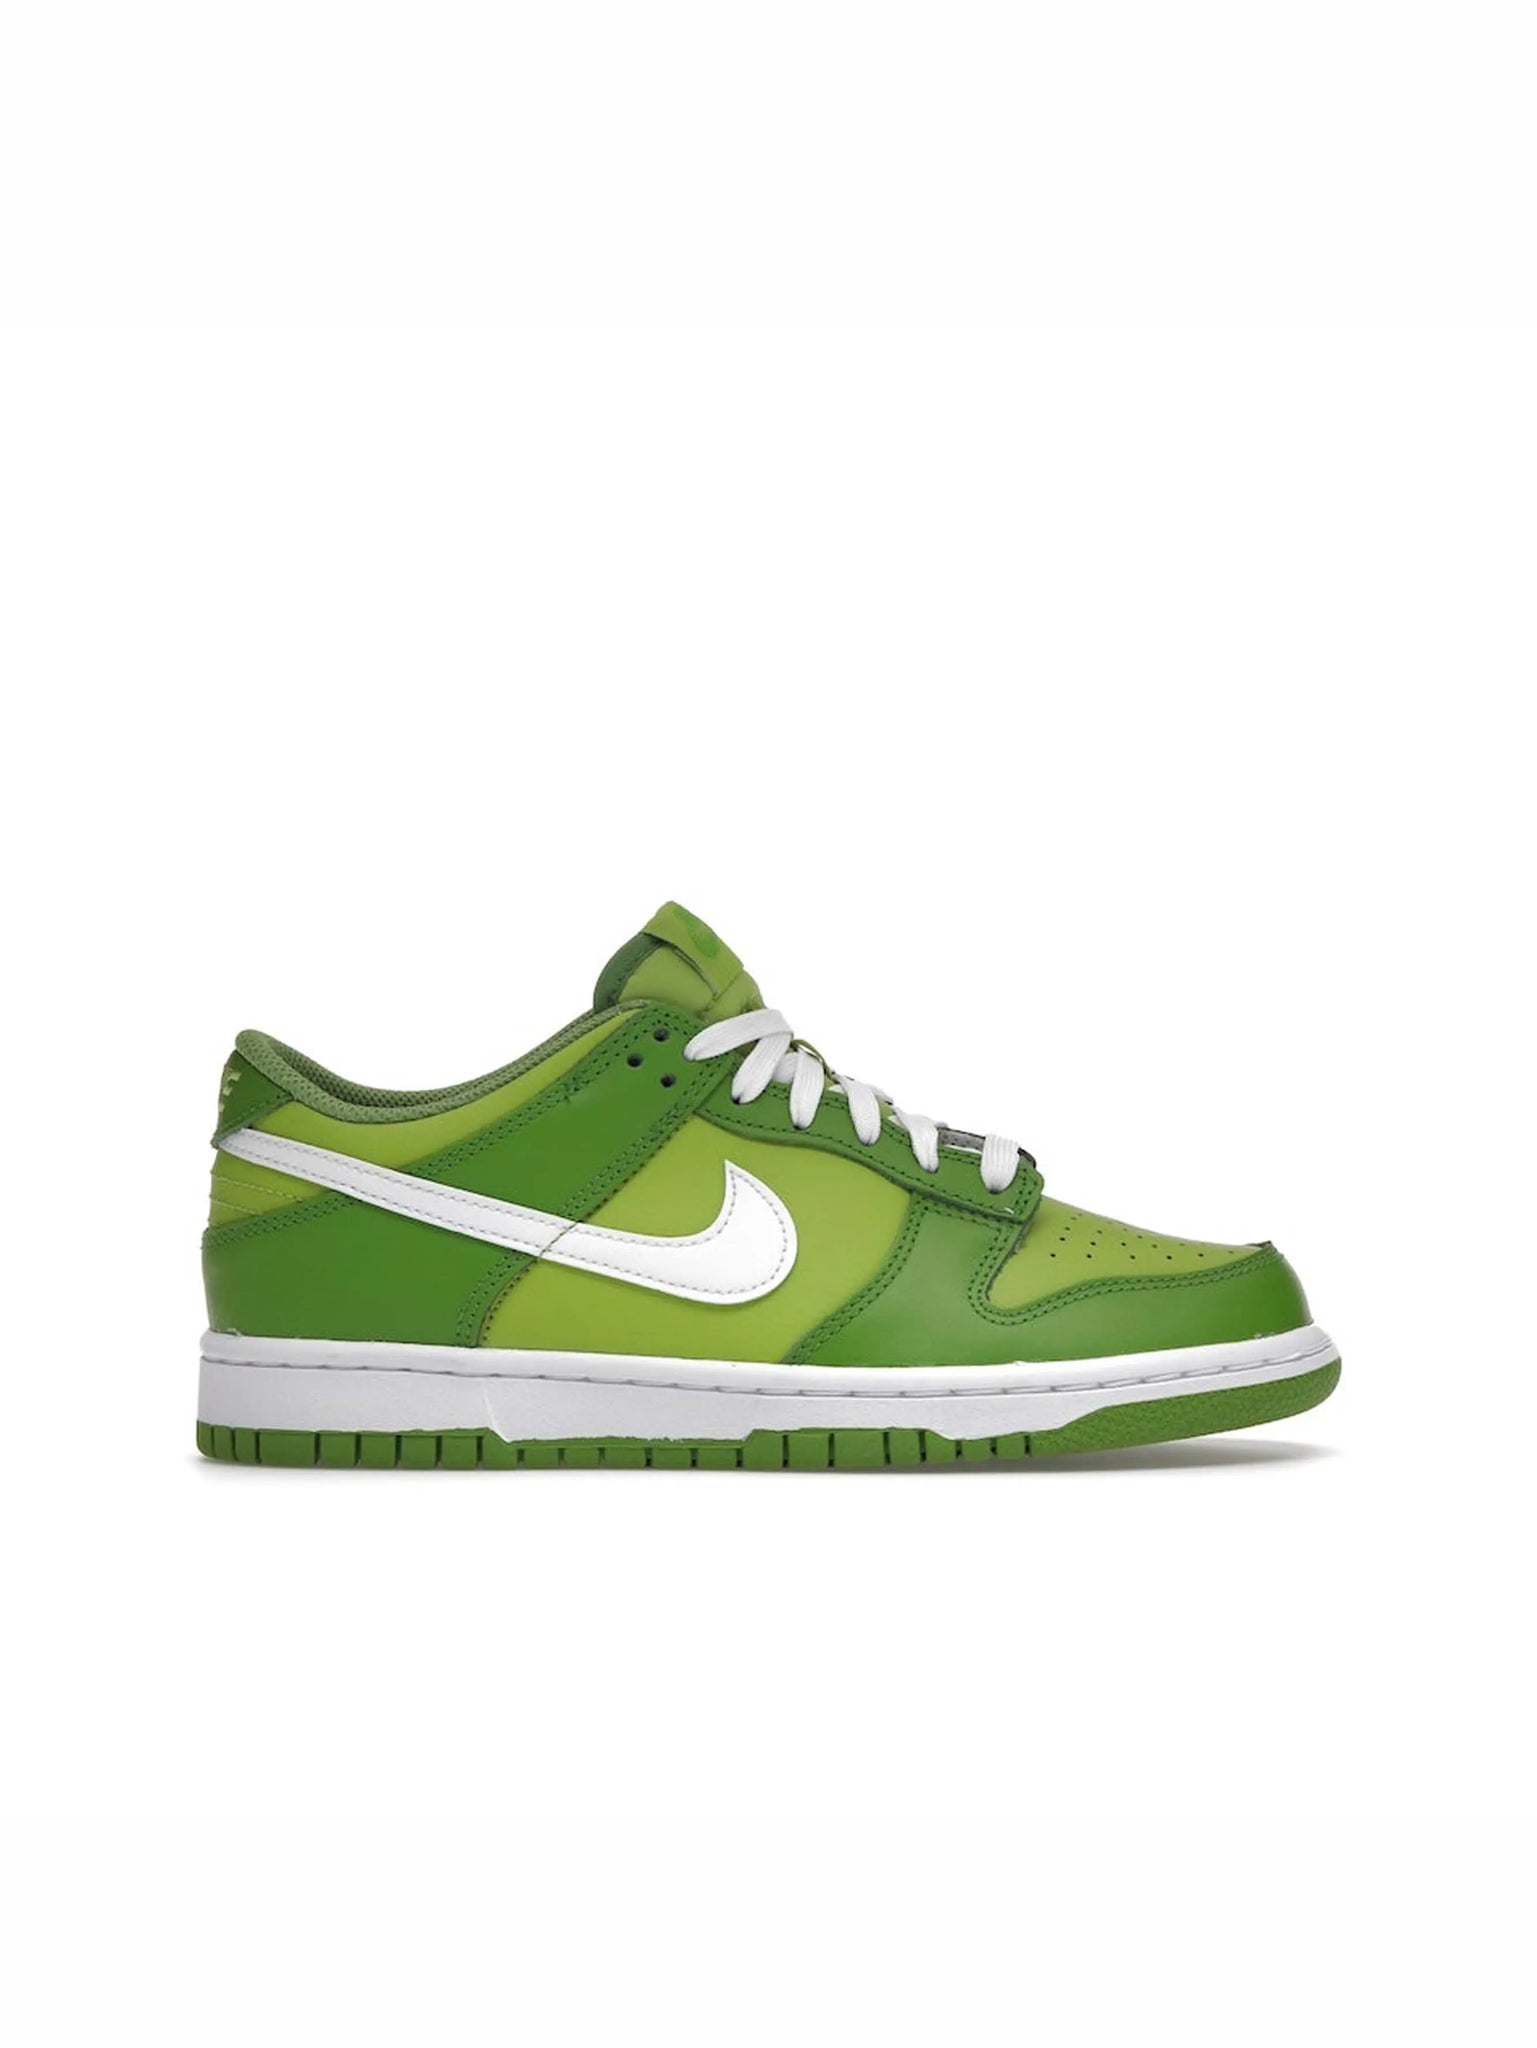 Nike Dunk Low Chlorophyll (GS) - Prior